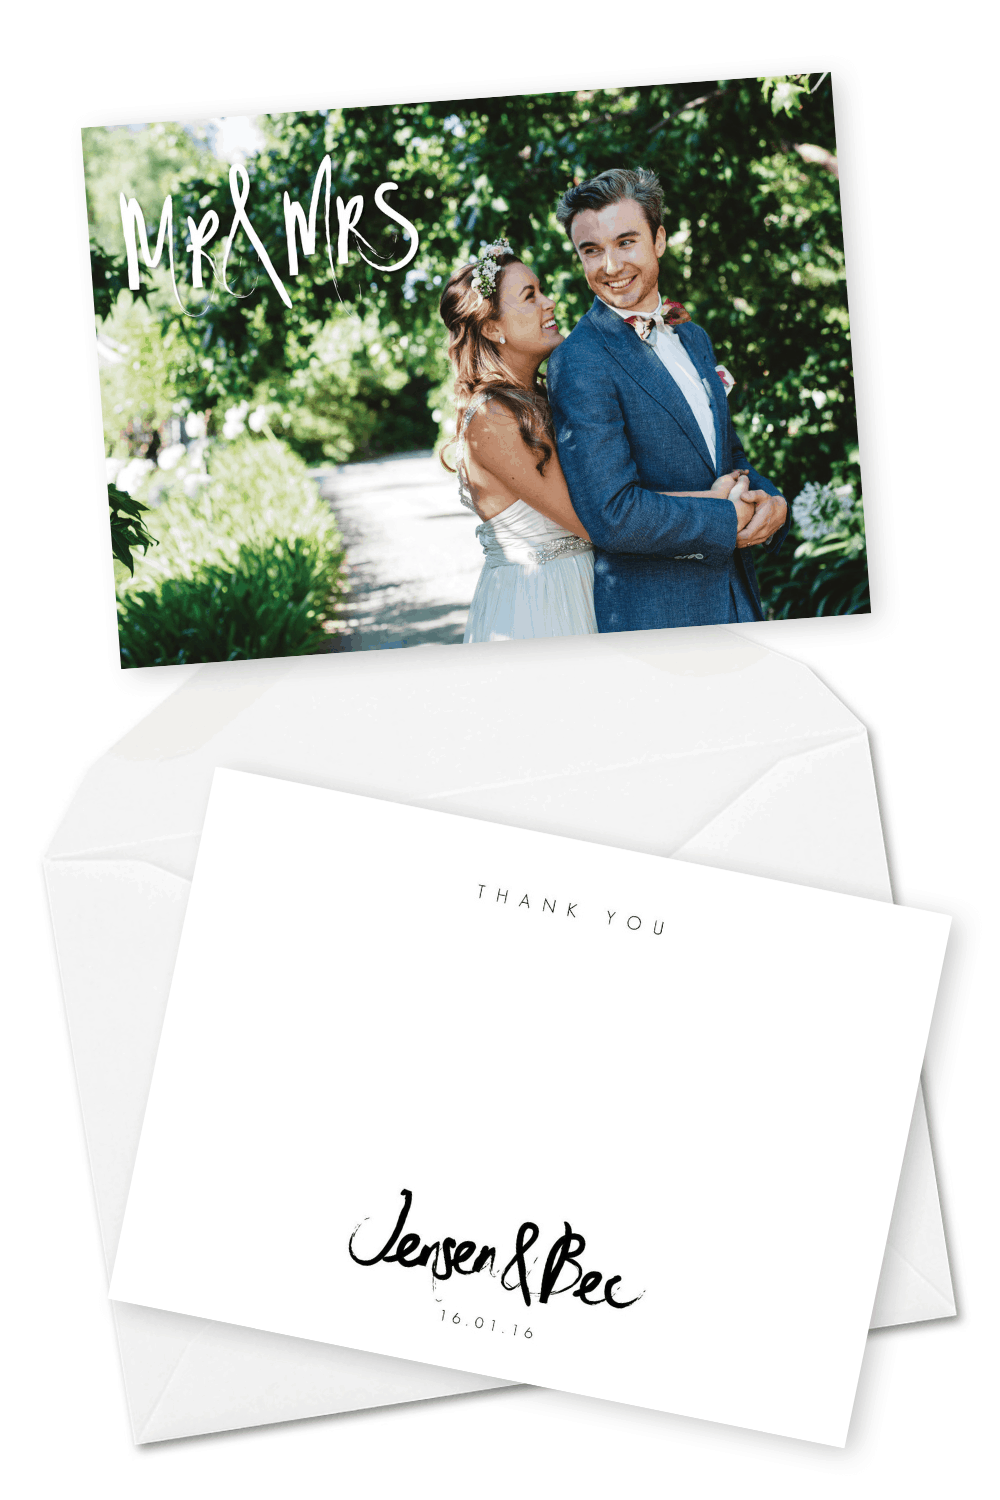 Wedding Thank You Cards Abigail Varney Photography For the Love of Stationery